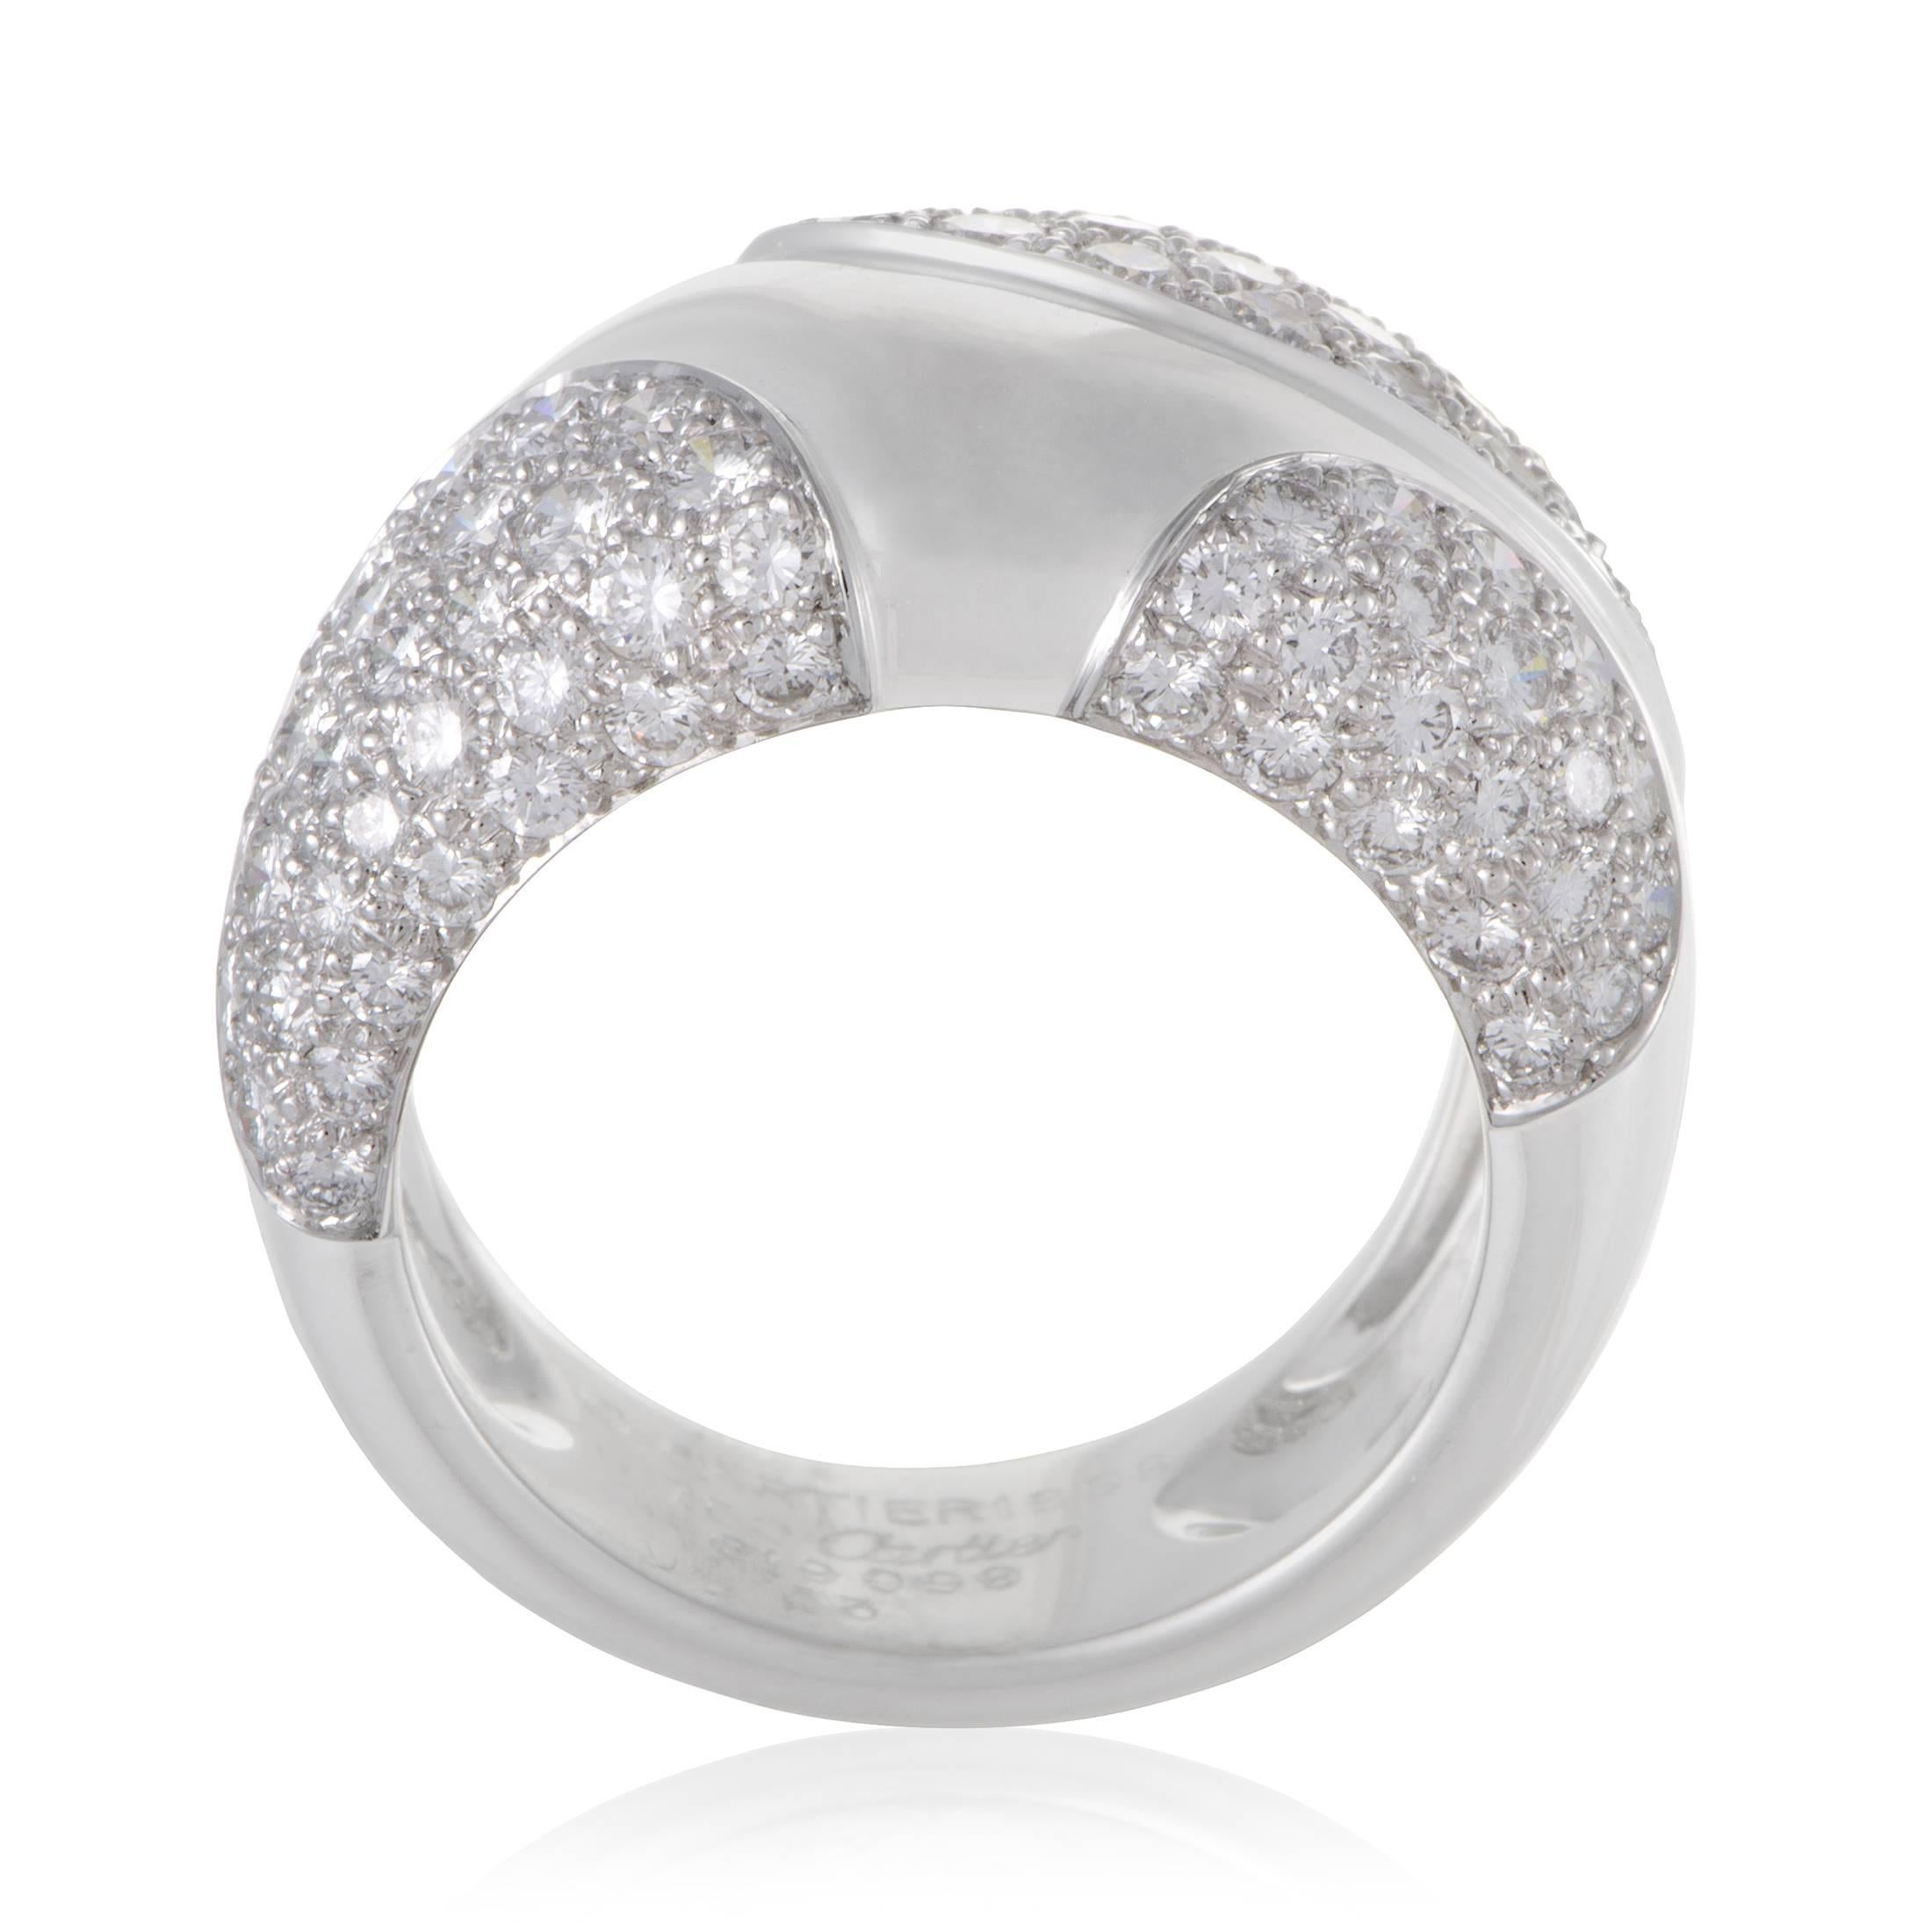 Partially paved with wonderfully lustrous diamonds weighing in total 3.25 carats, this magnificent 18K white gold ring from Cartier exudes exceptional style and fascinating quality with its immaculate polish and exquisite gem-setting. Ring Top